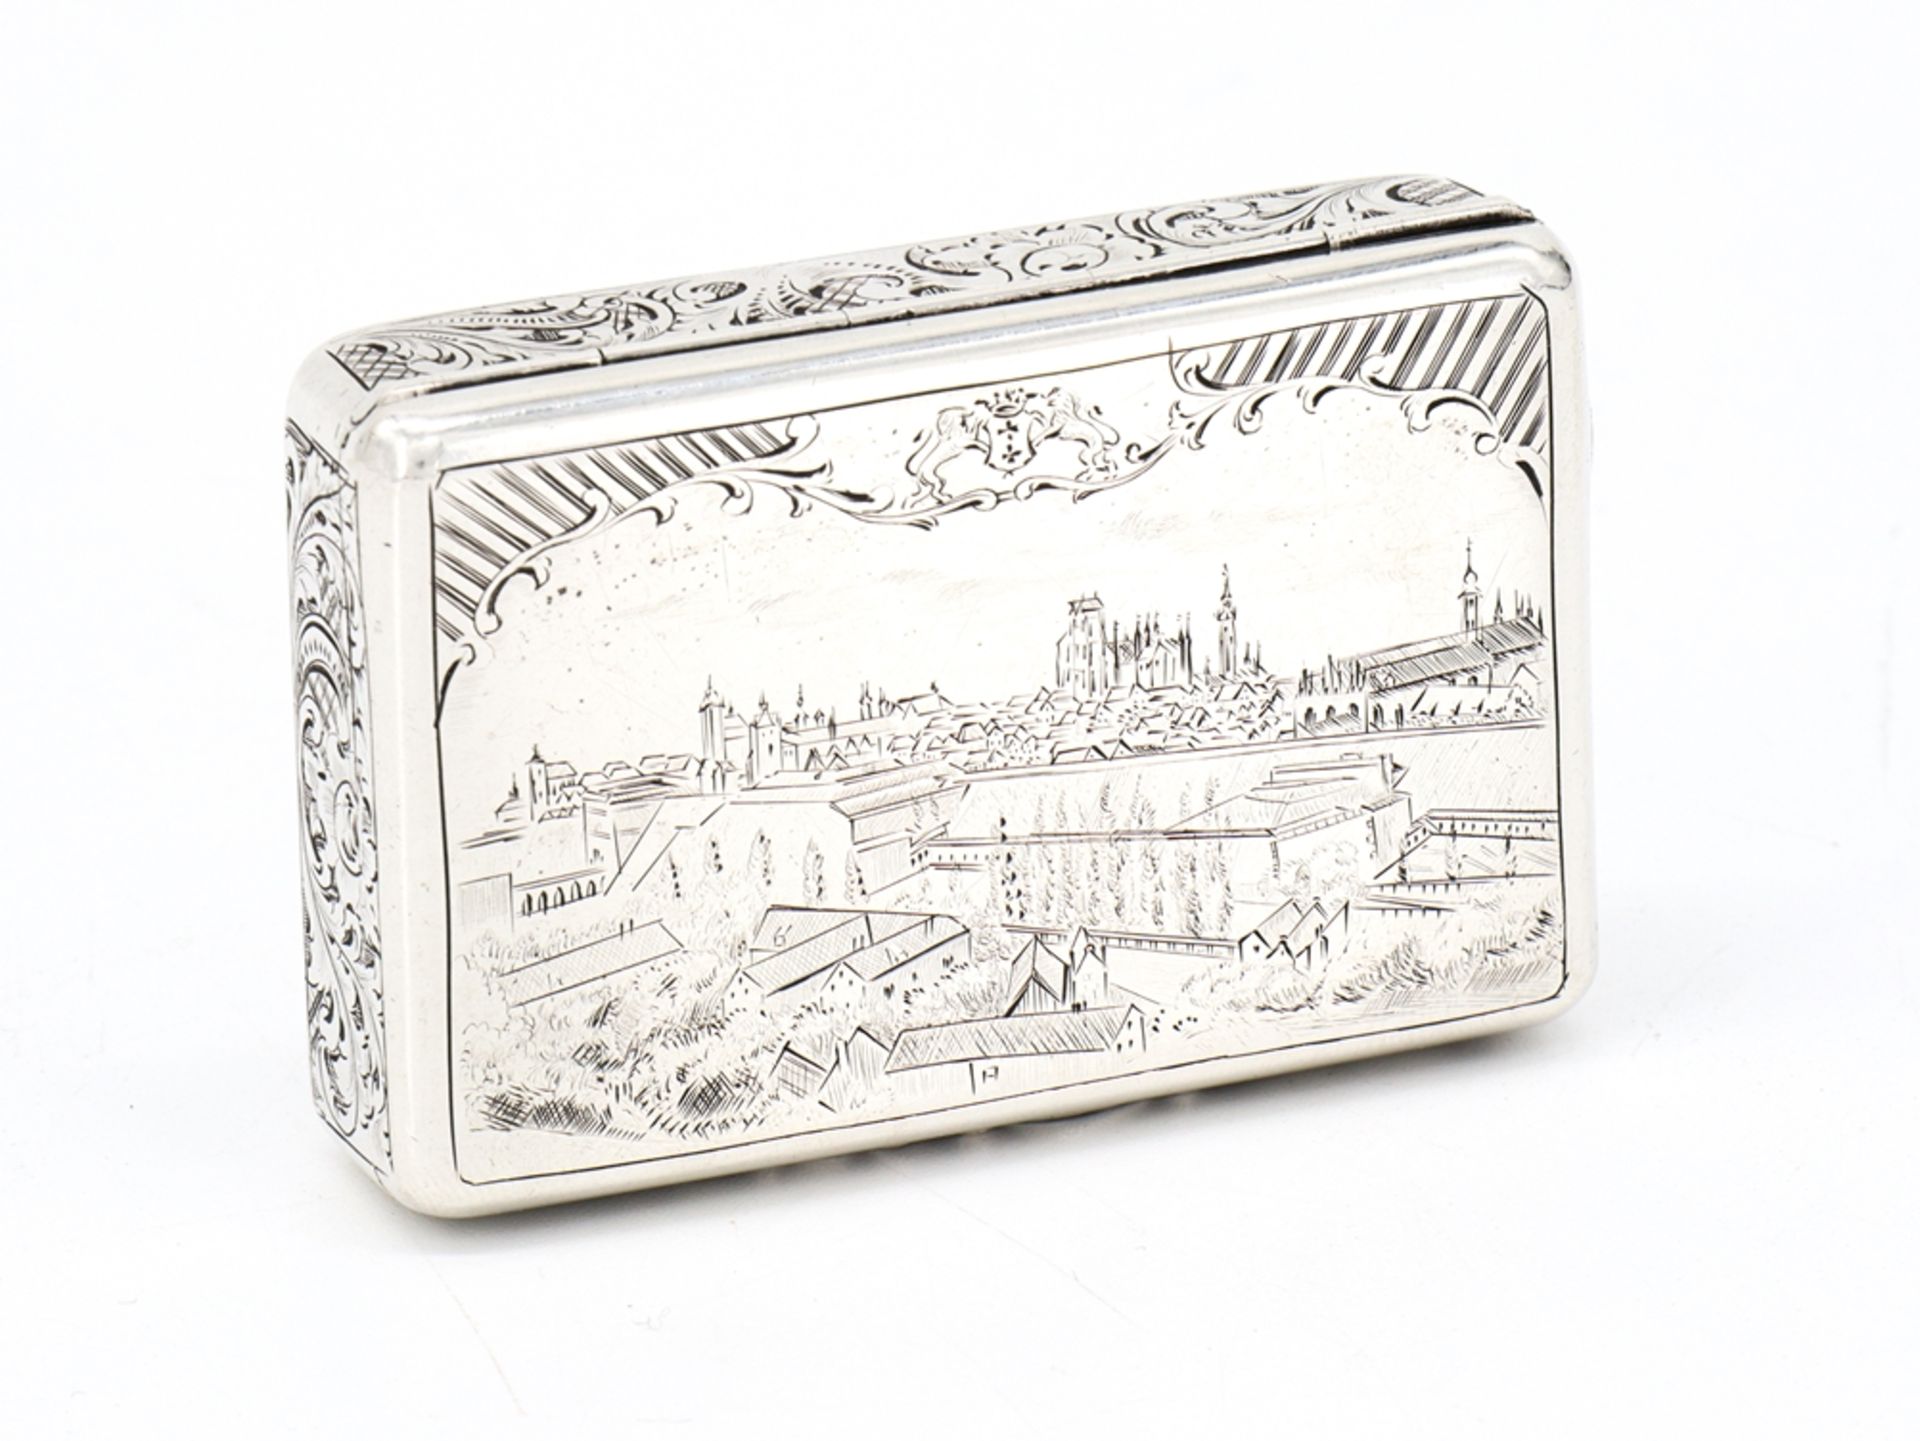 Match silver case with finely chased city view, around 1850